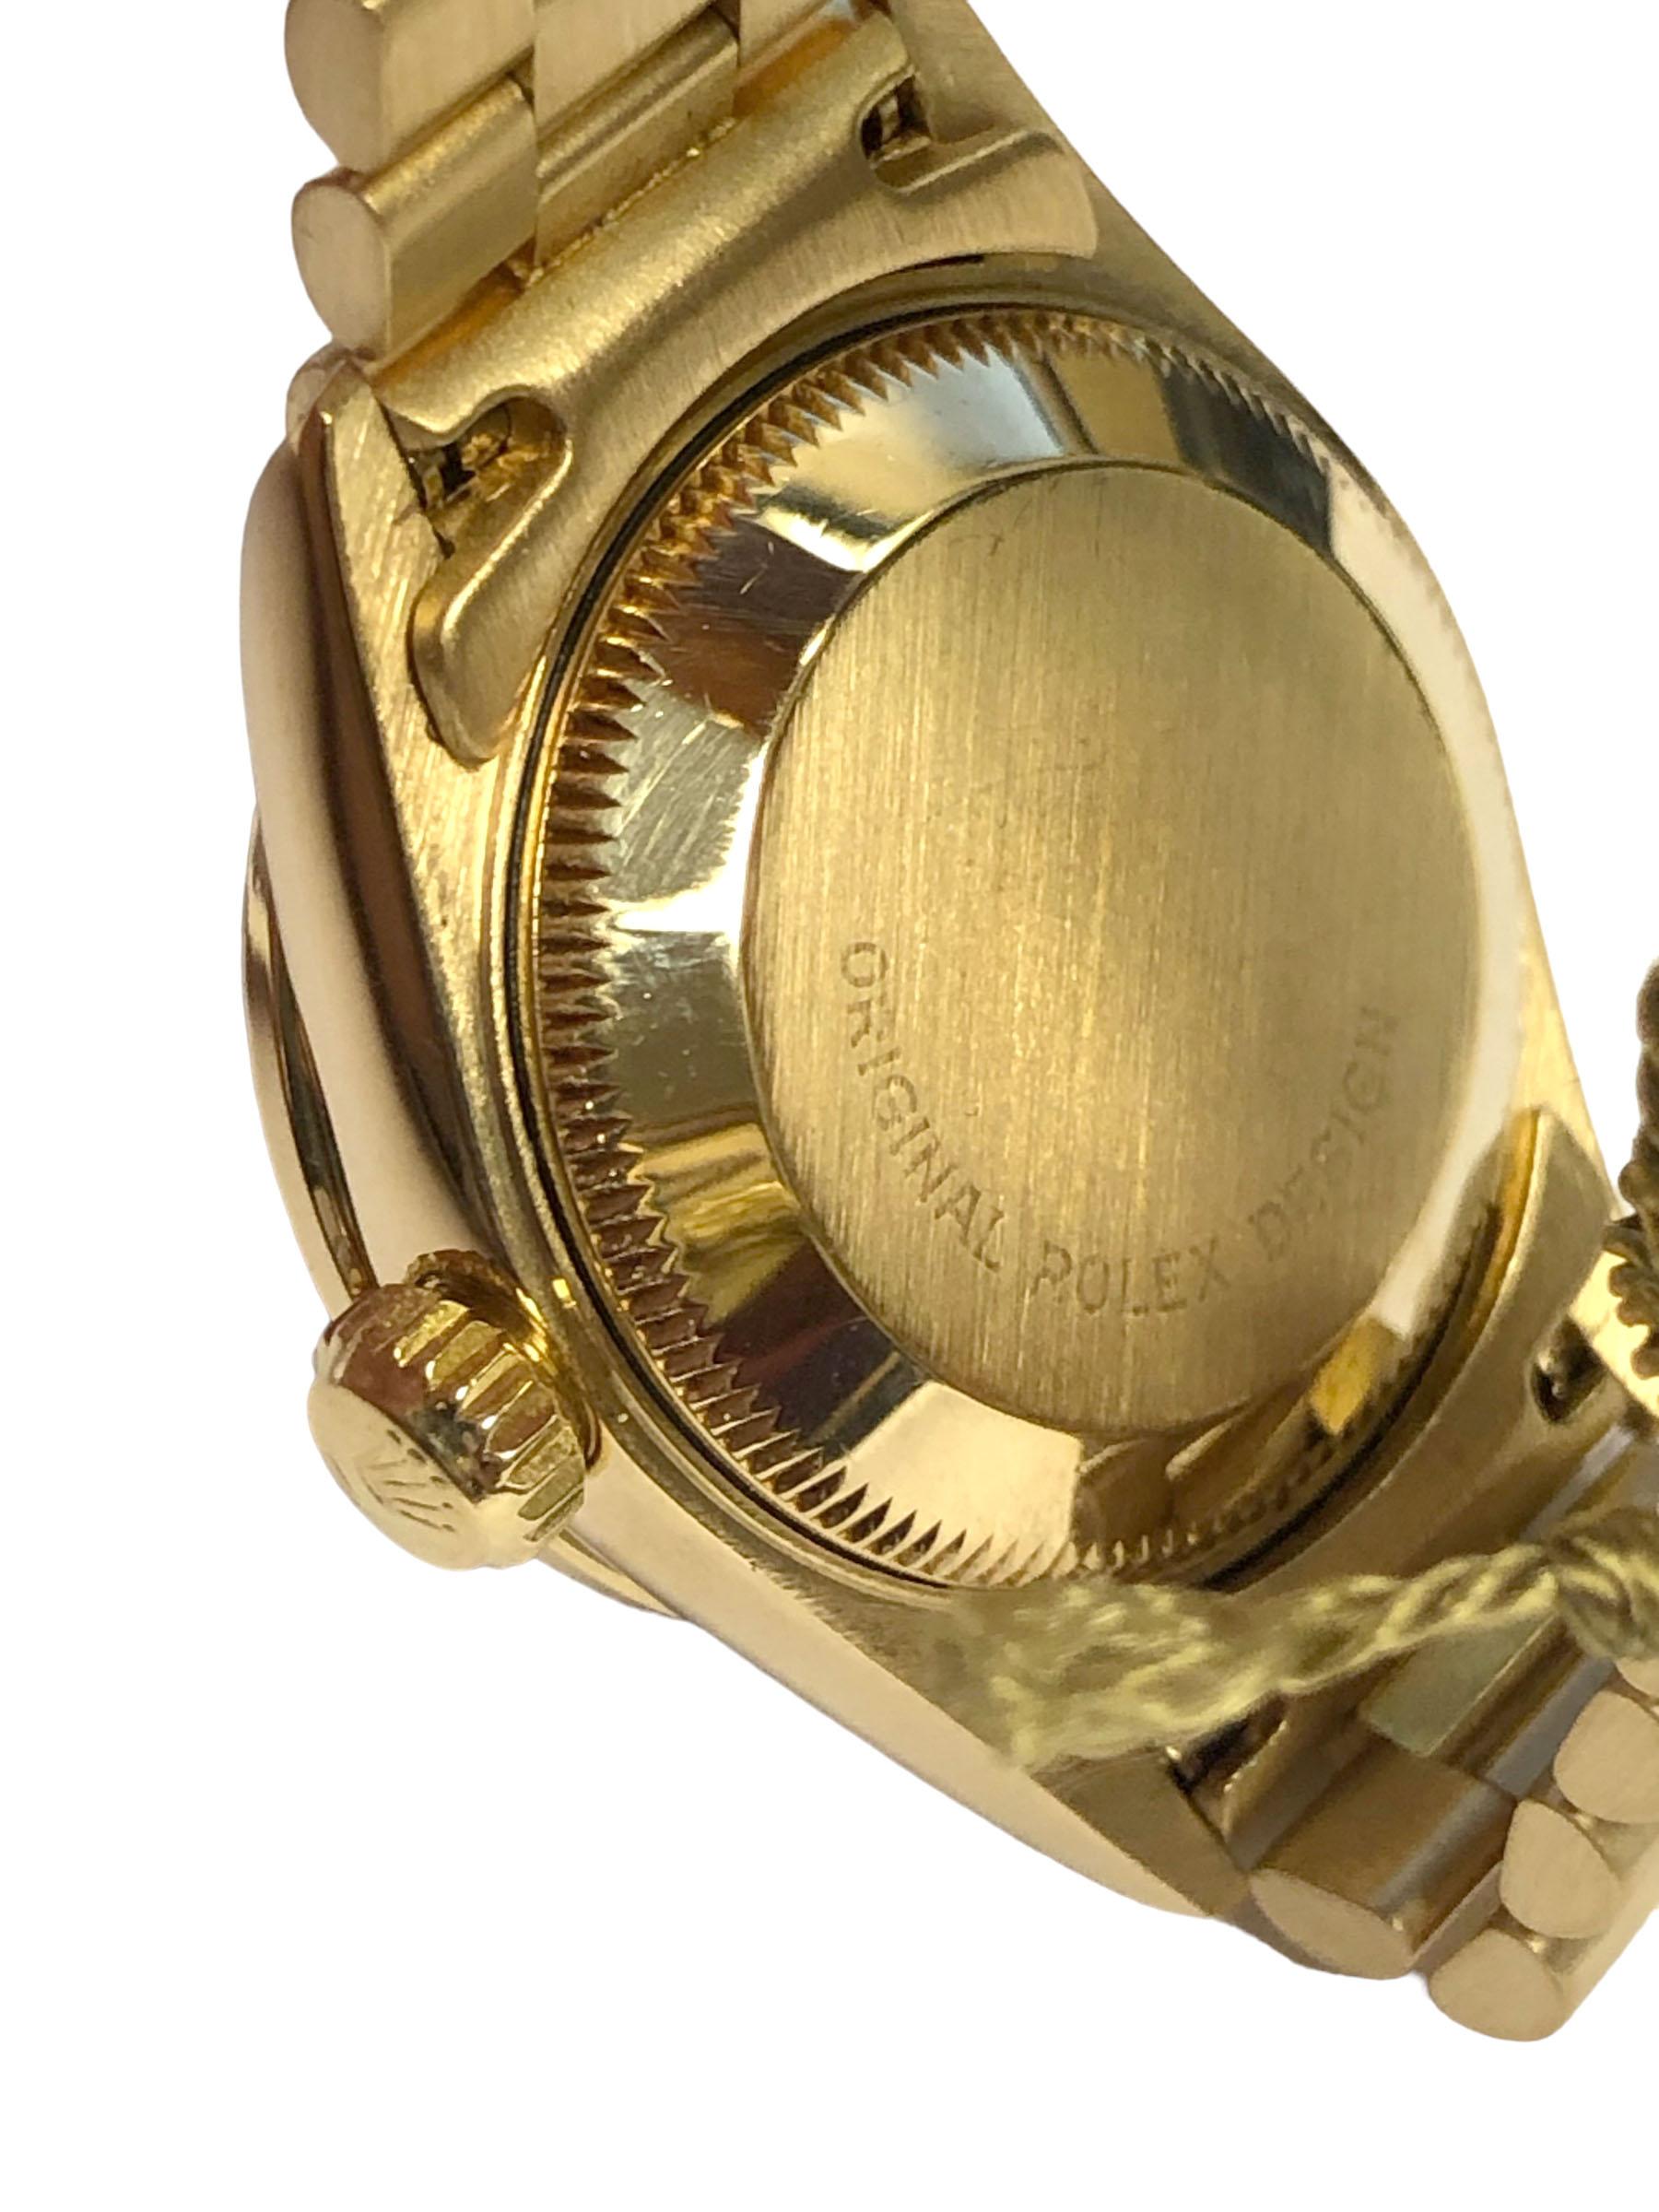 1988 Rolex Crown Collection, Presidential model Ladies Wrist Watch, 26 M.M. 18k Yellow Gold 3 piece water resistant Oyster case. Factory original Diamond bezel totaling approximately 1 Carat and further having Diamond set Lugs 29 Jewel Caliber 2135